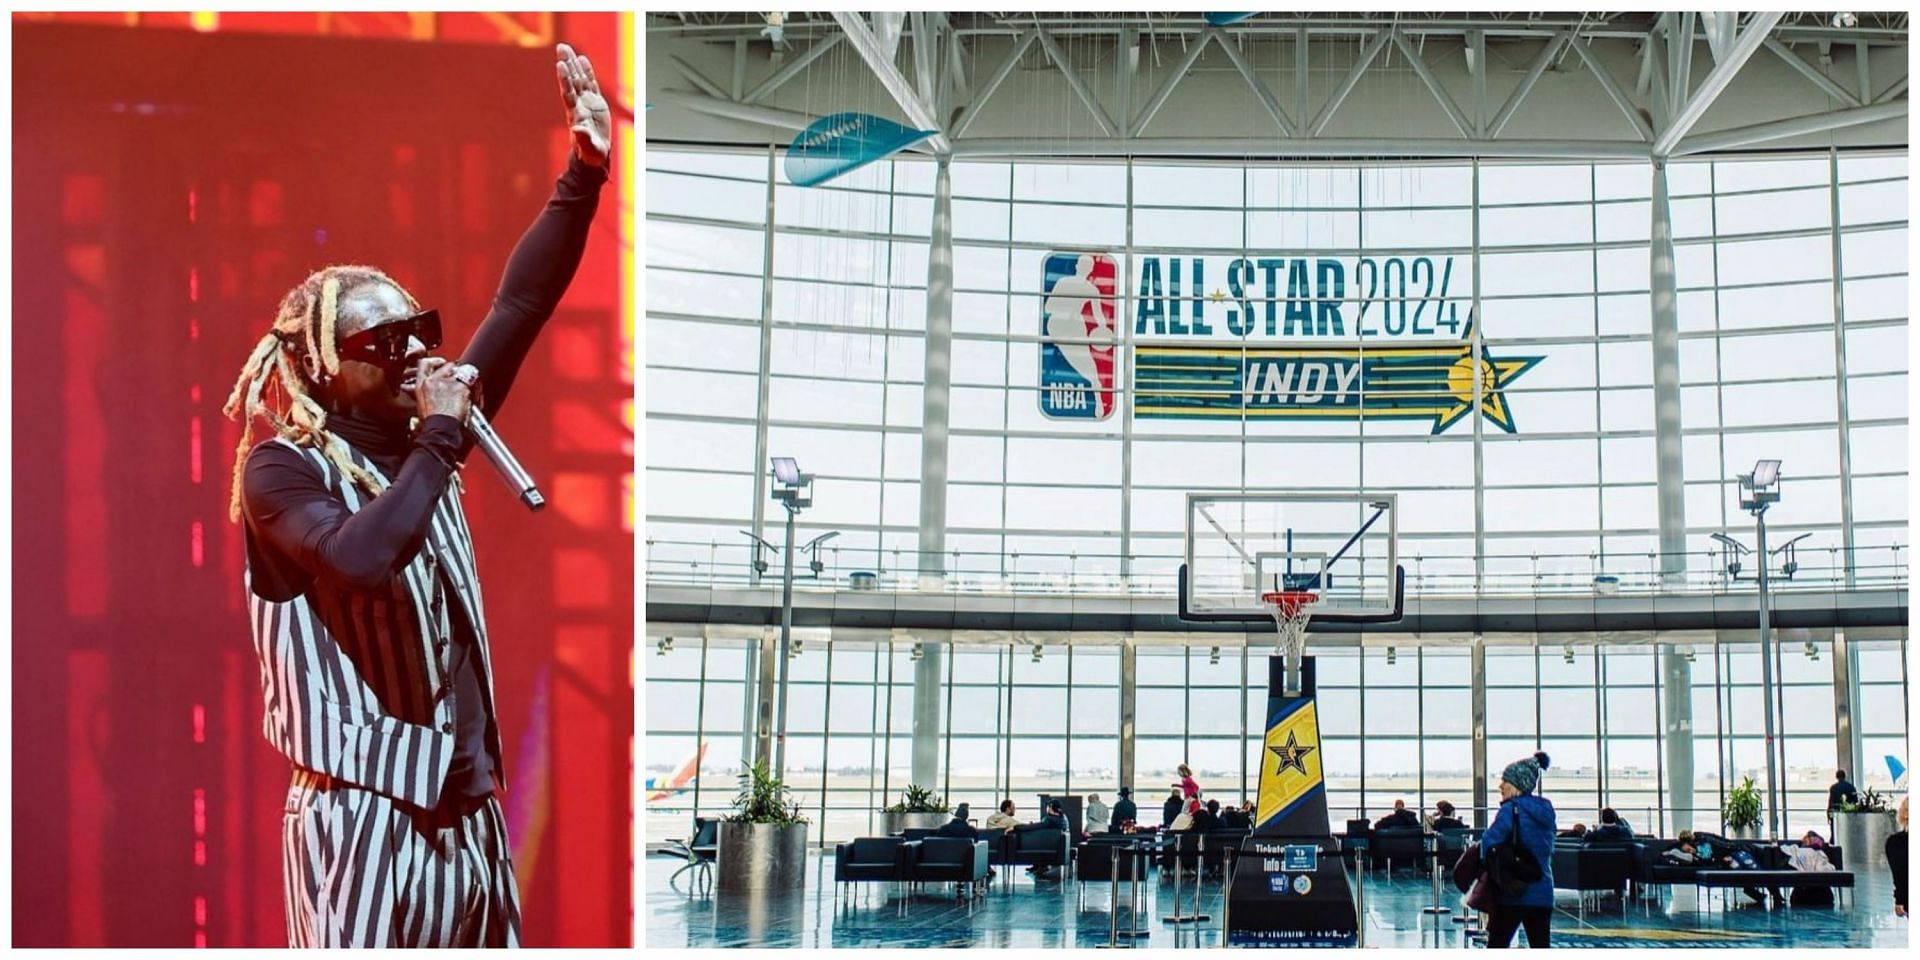 5 music artists set to appear at the 2024 NBA All-Star Weekend